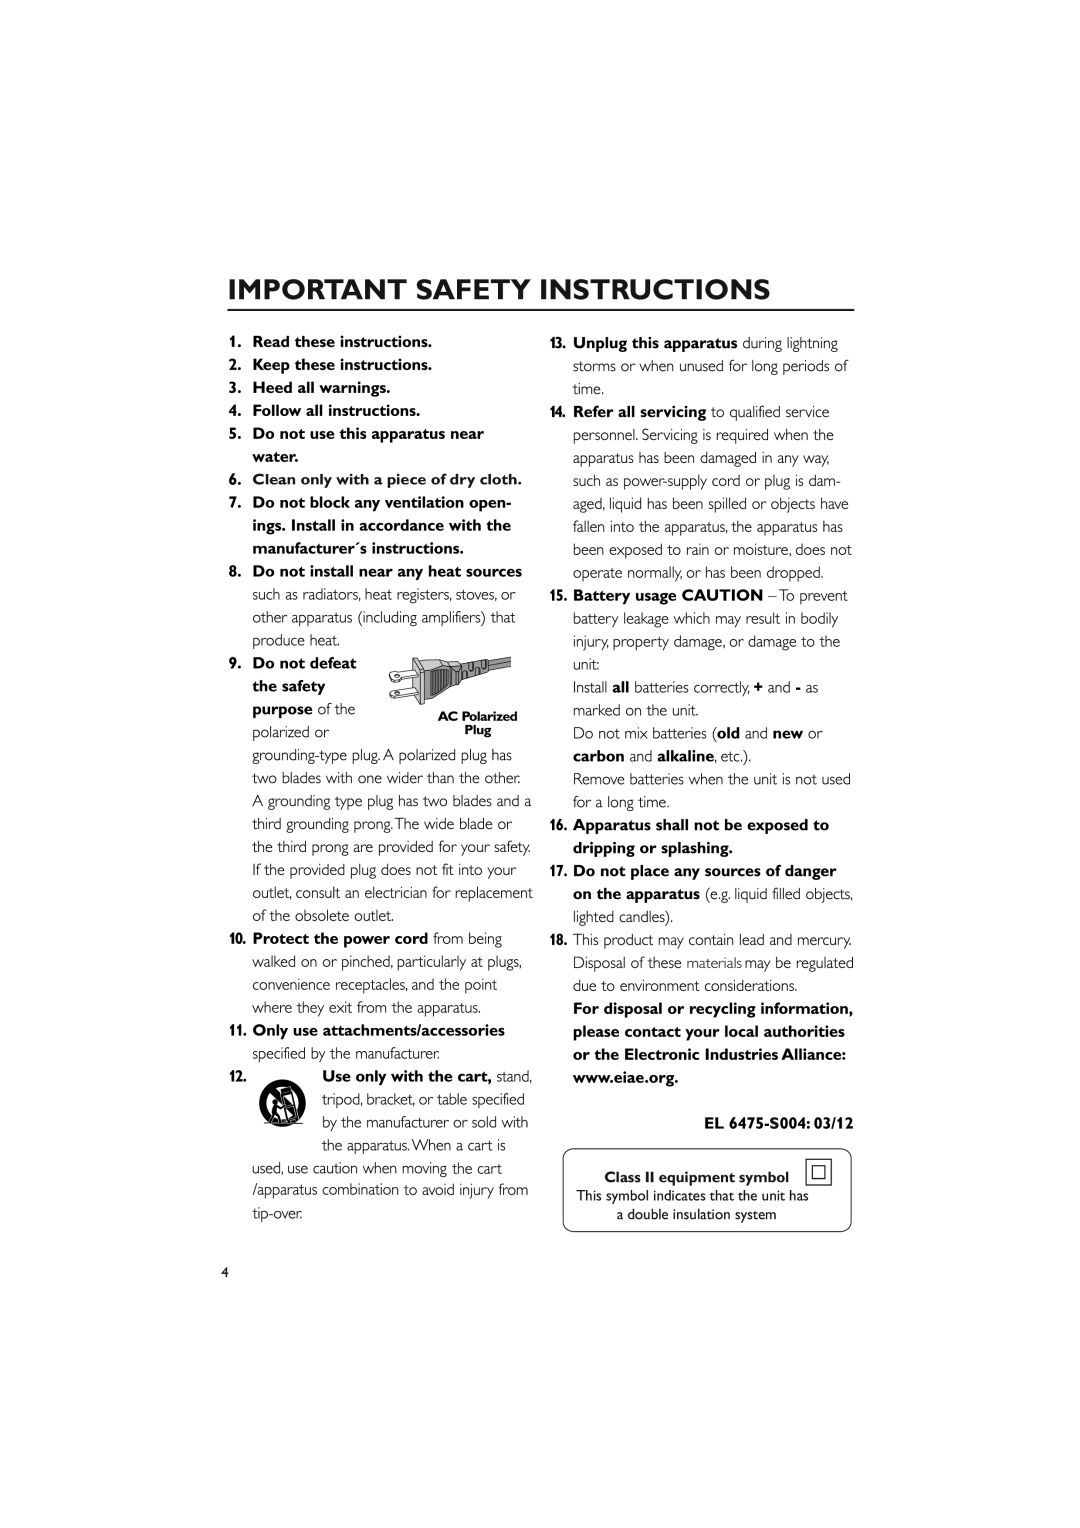 Philips MCM275 owner manual Important Safety Instructions, Clean only with a piece of dry cloth, Class II equipment symbol 